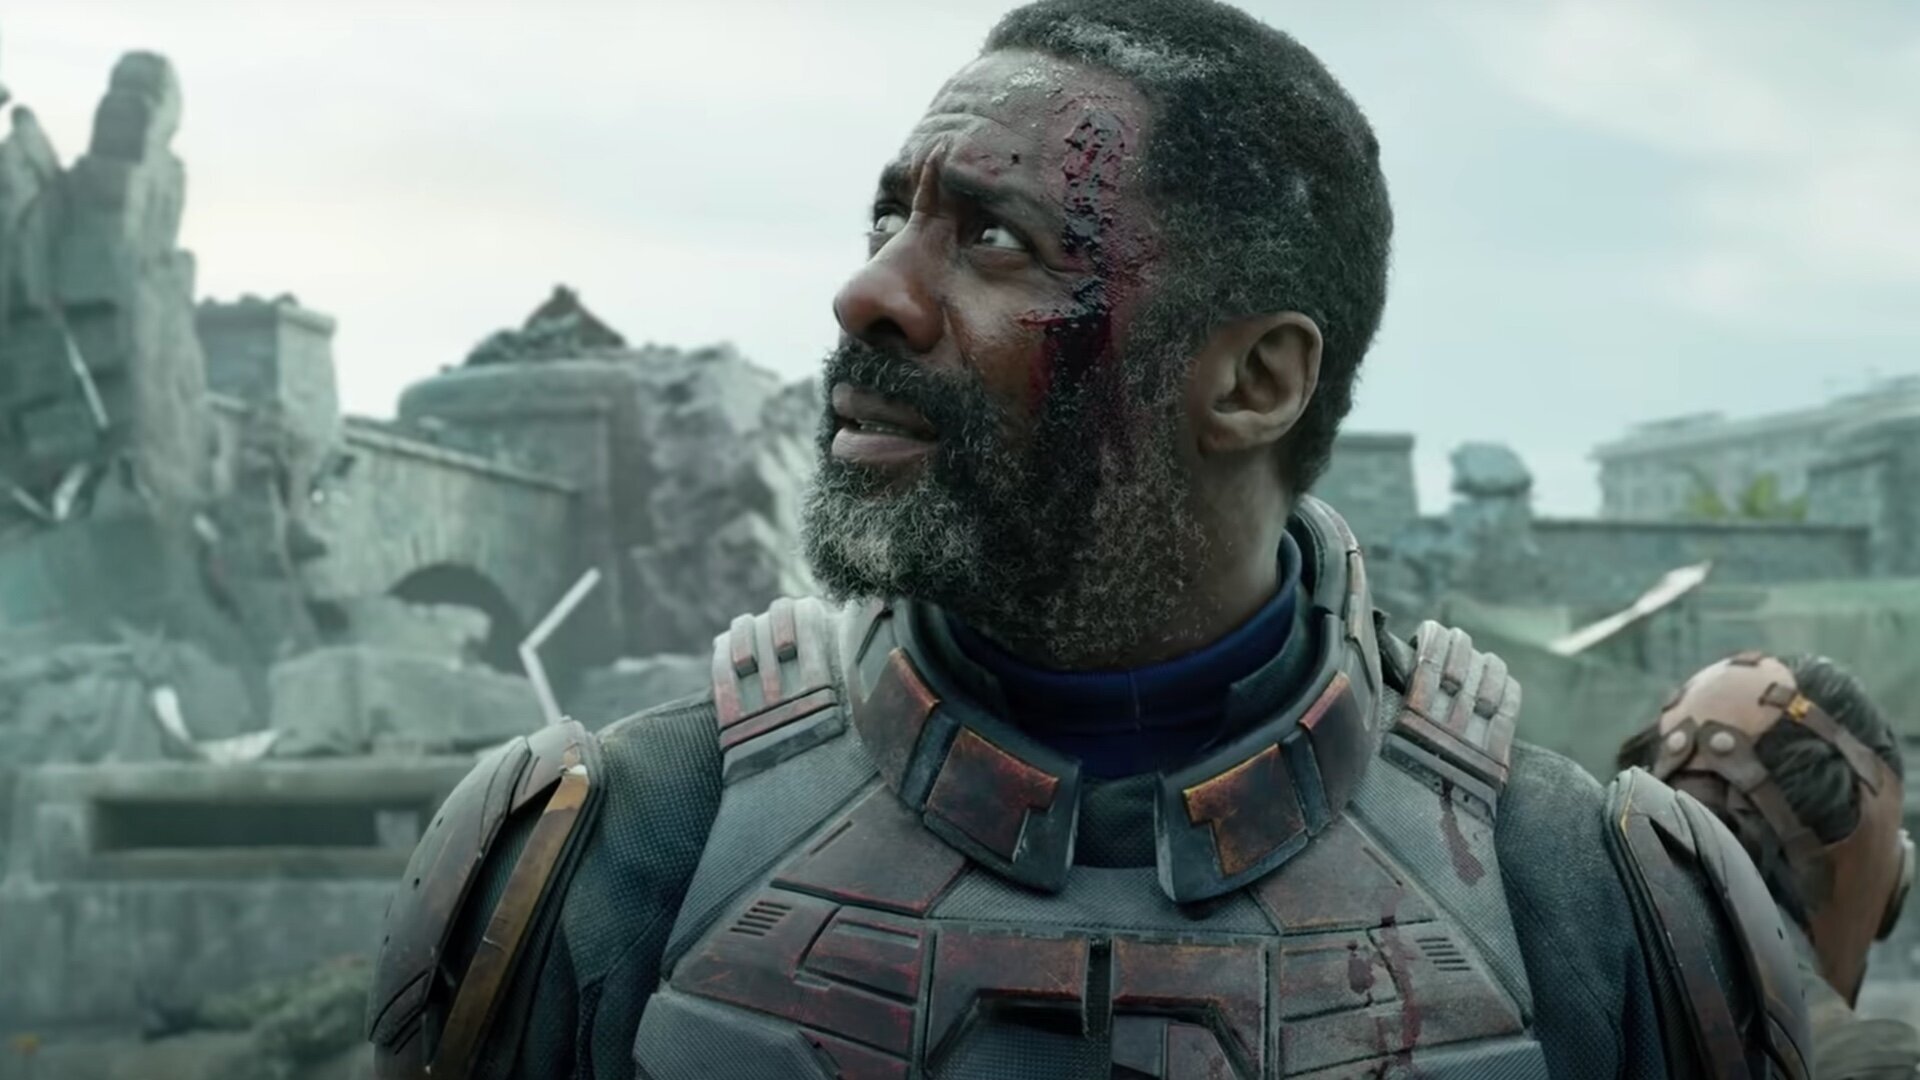 The Suicide Squad: Actors For Whom A Role Was Specially Written Other Than Idris Elba